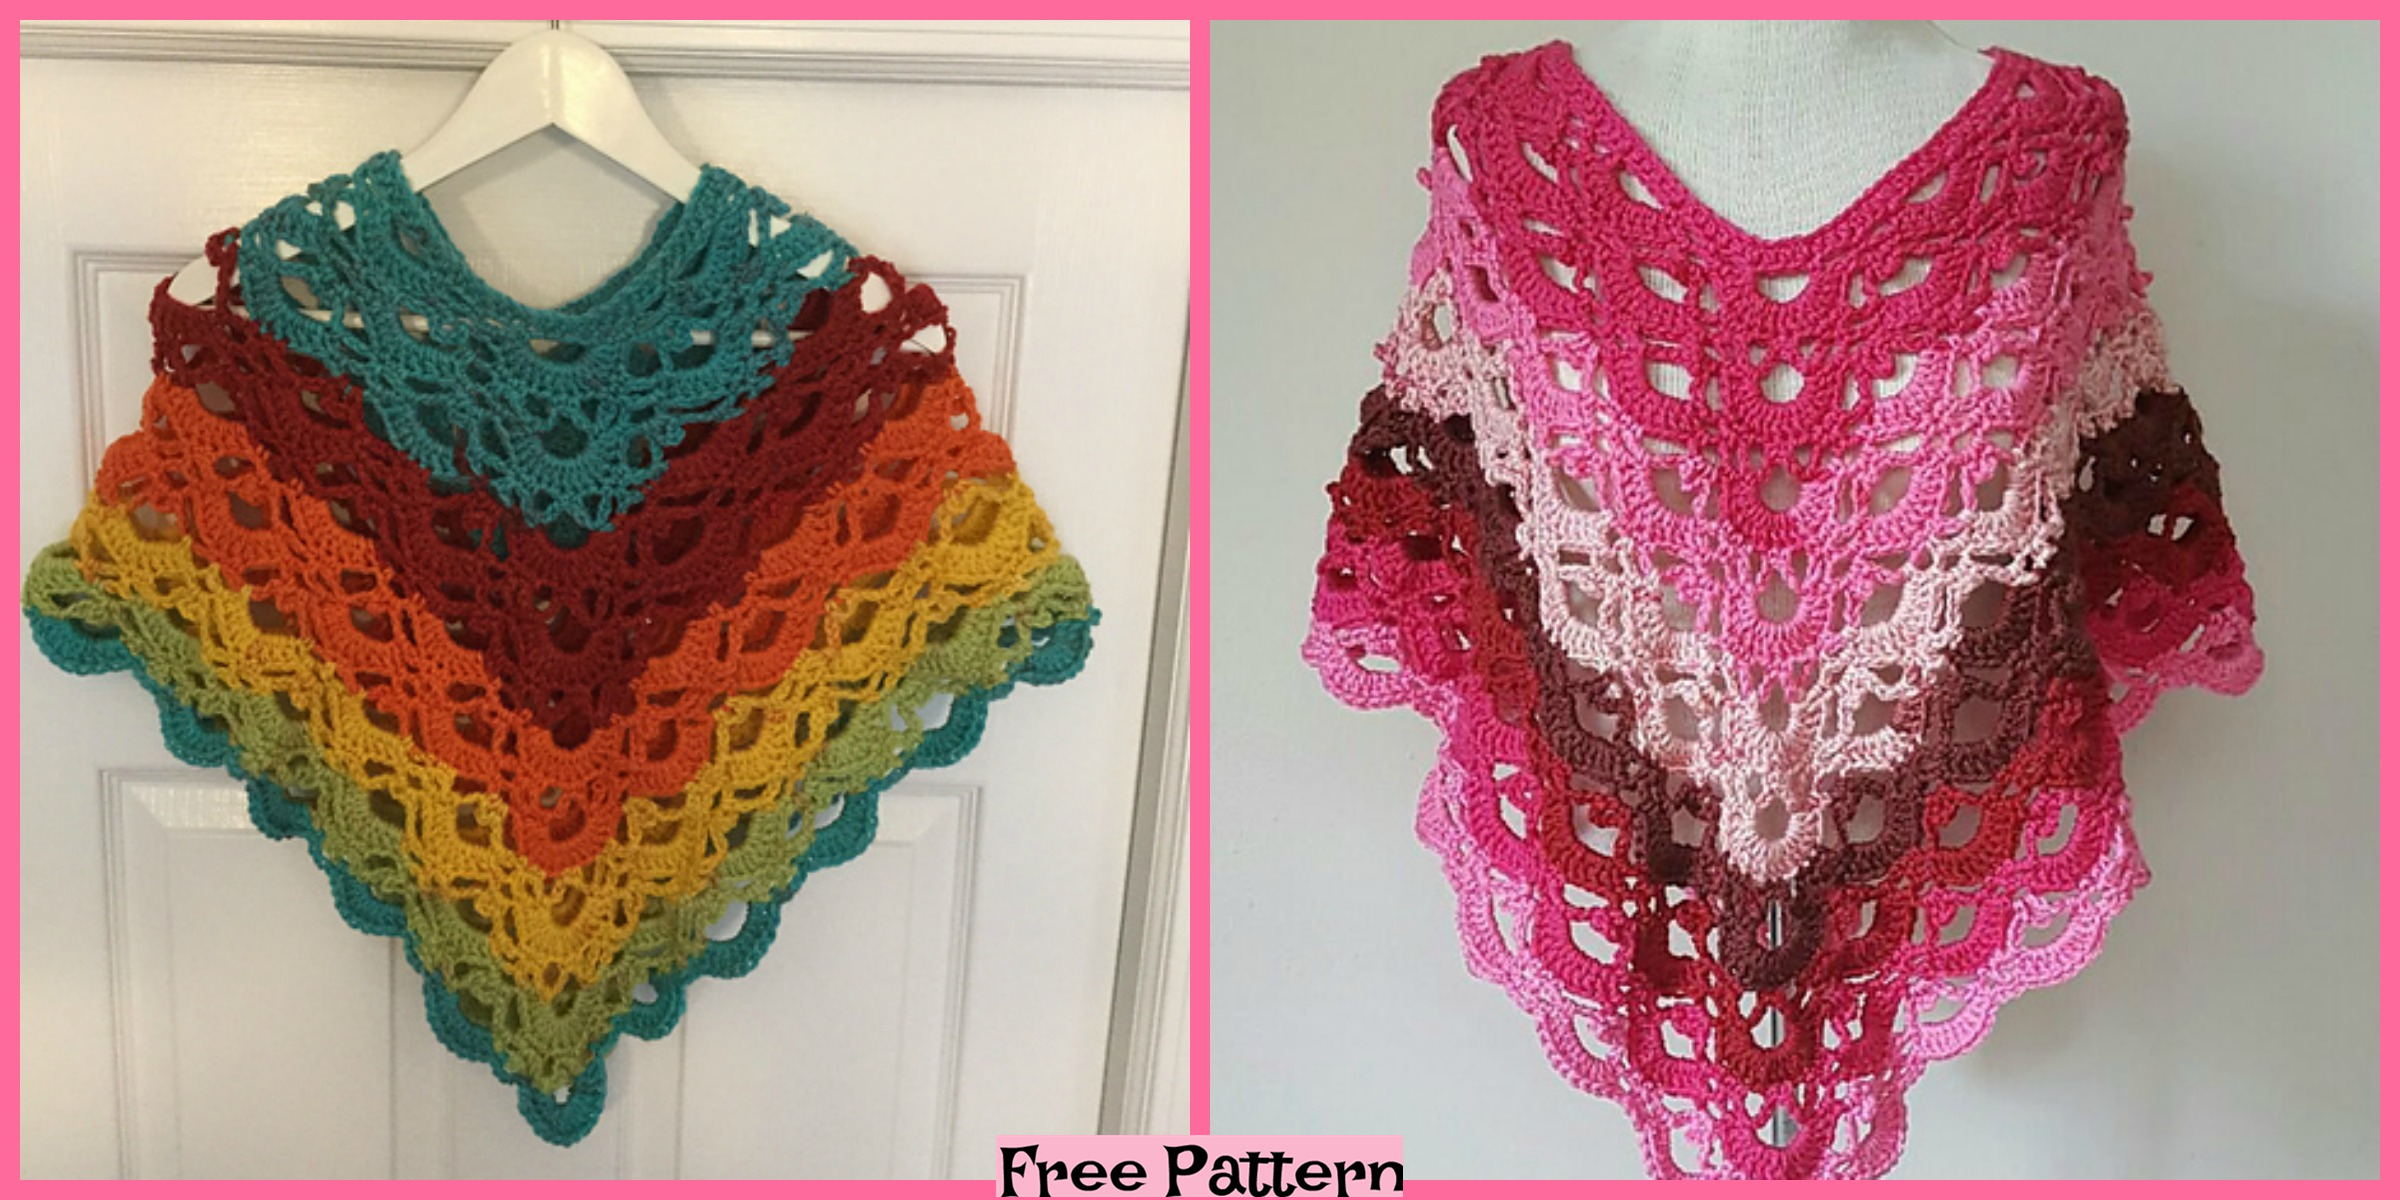 Crochet Child Poncho Free Pattern Diy 4 Ever,Master Forge Grill Parts